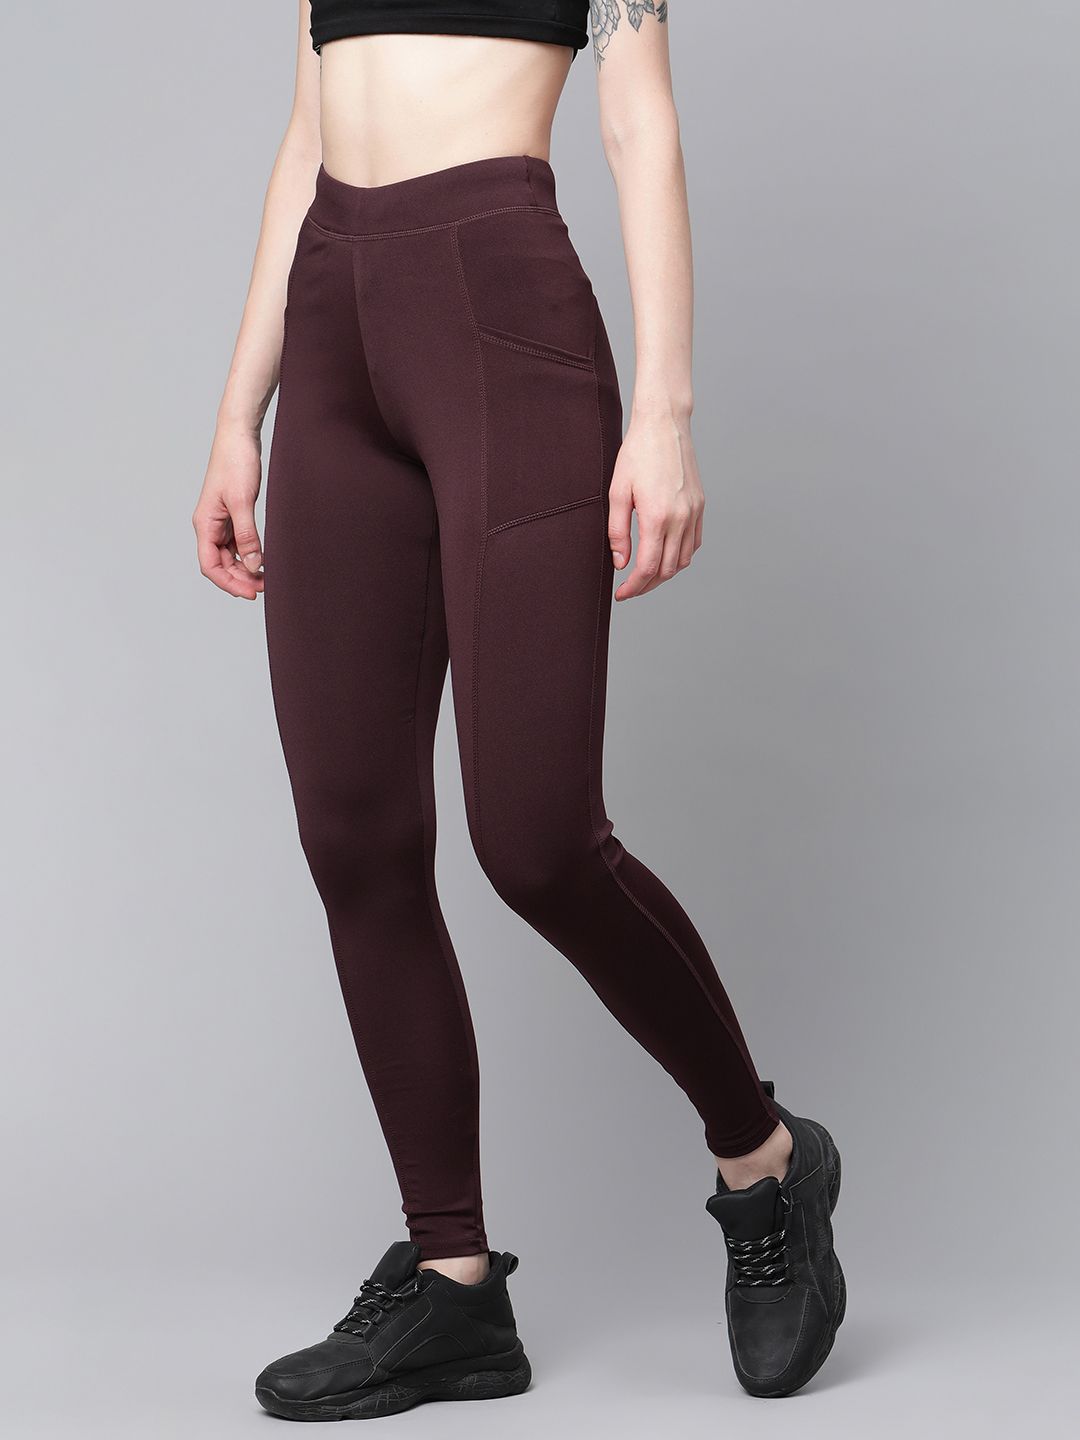 Blinkin Women Burgundy Solid High-Rise Tights Price in India